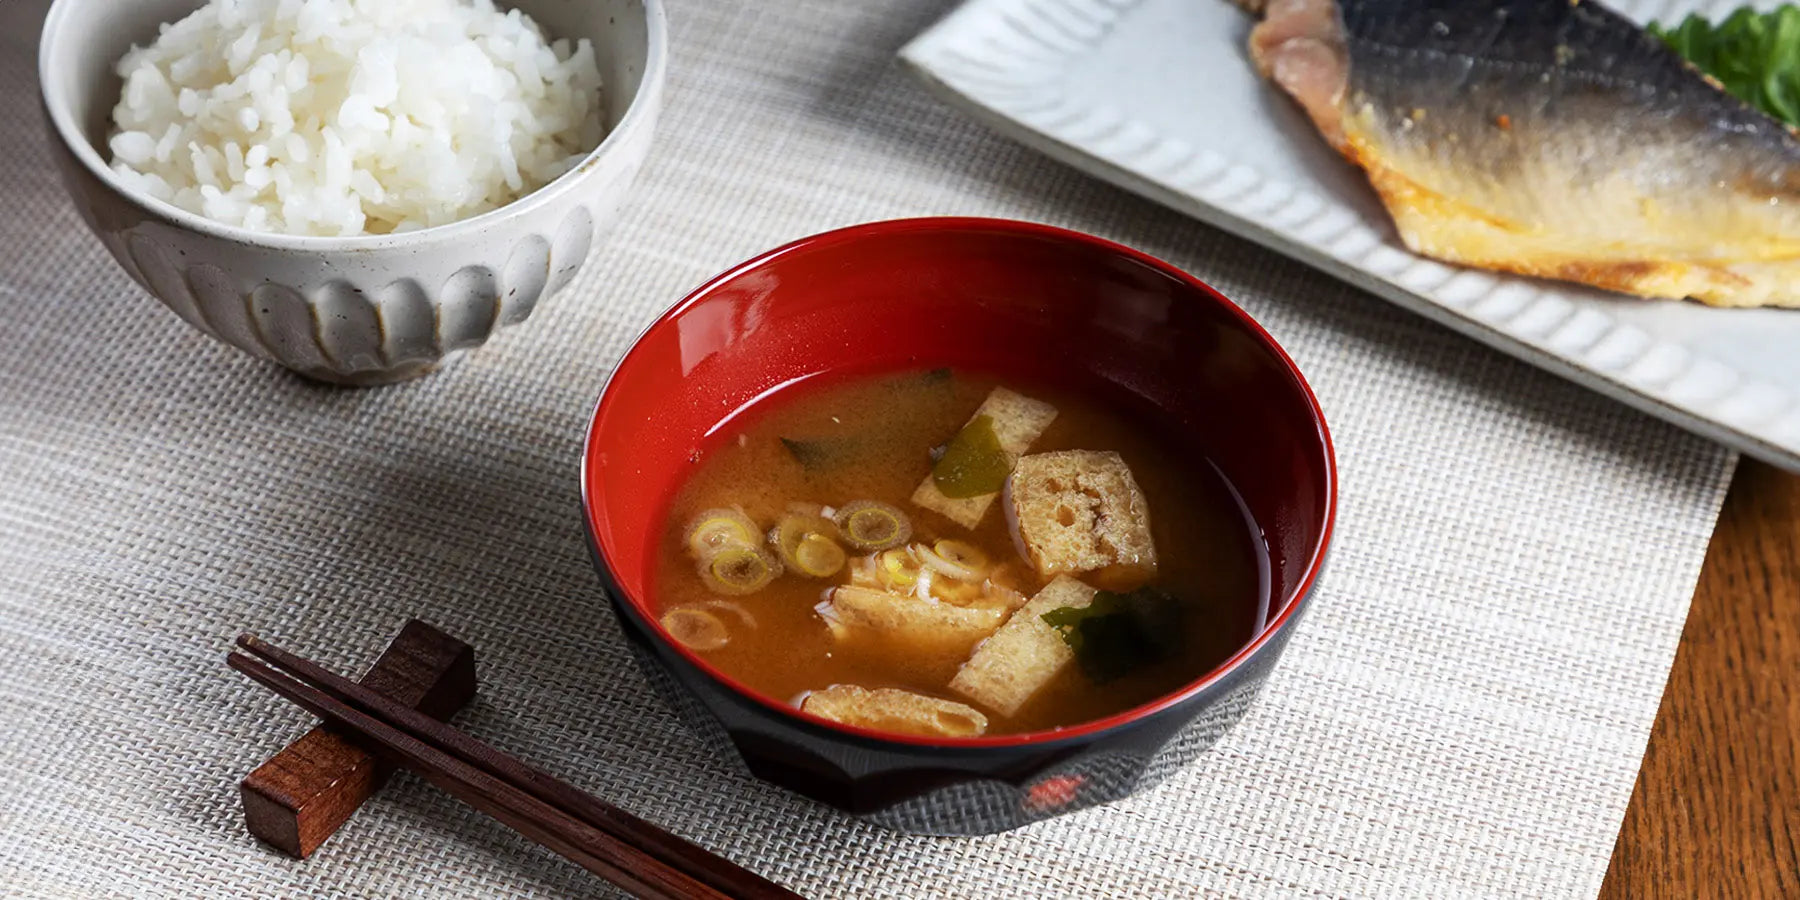 Discover our great selection of Miso Soup supplies on Globalkitchen Japan.